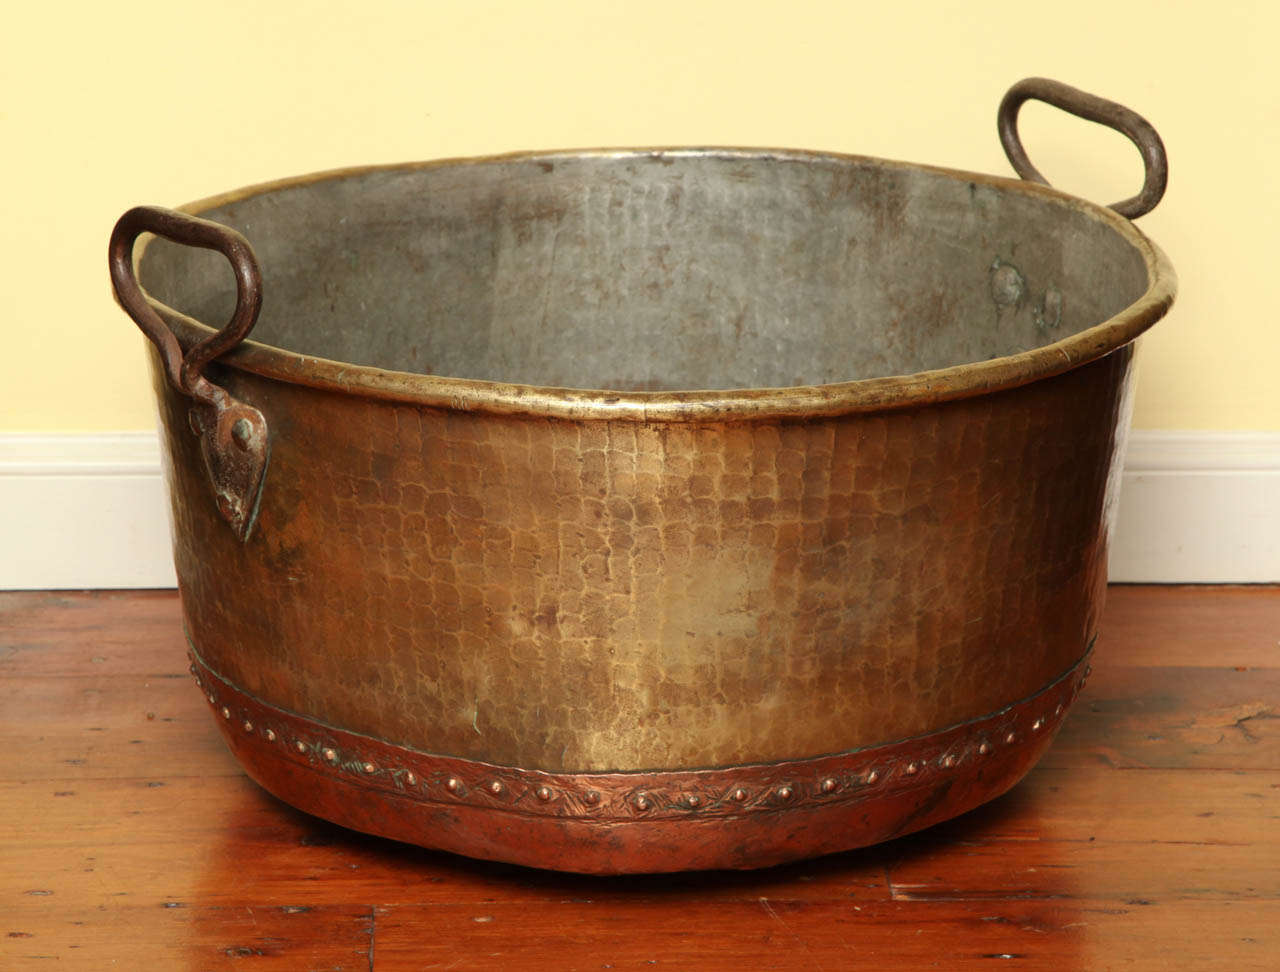 Fine large scale Cotswolds hand hammered and riveted copper and brass log bucket with a rolled top rim and having twin heart shaped iron handles secured with copper rivets.  English c.1860

Height of bucket: 13 3/4